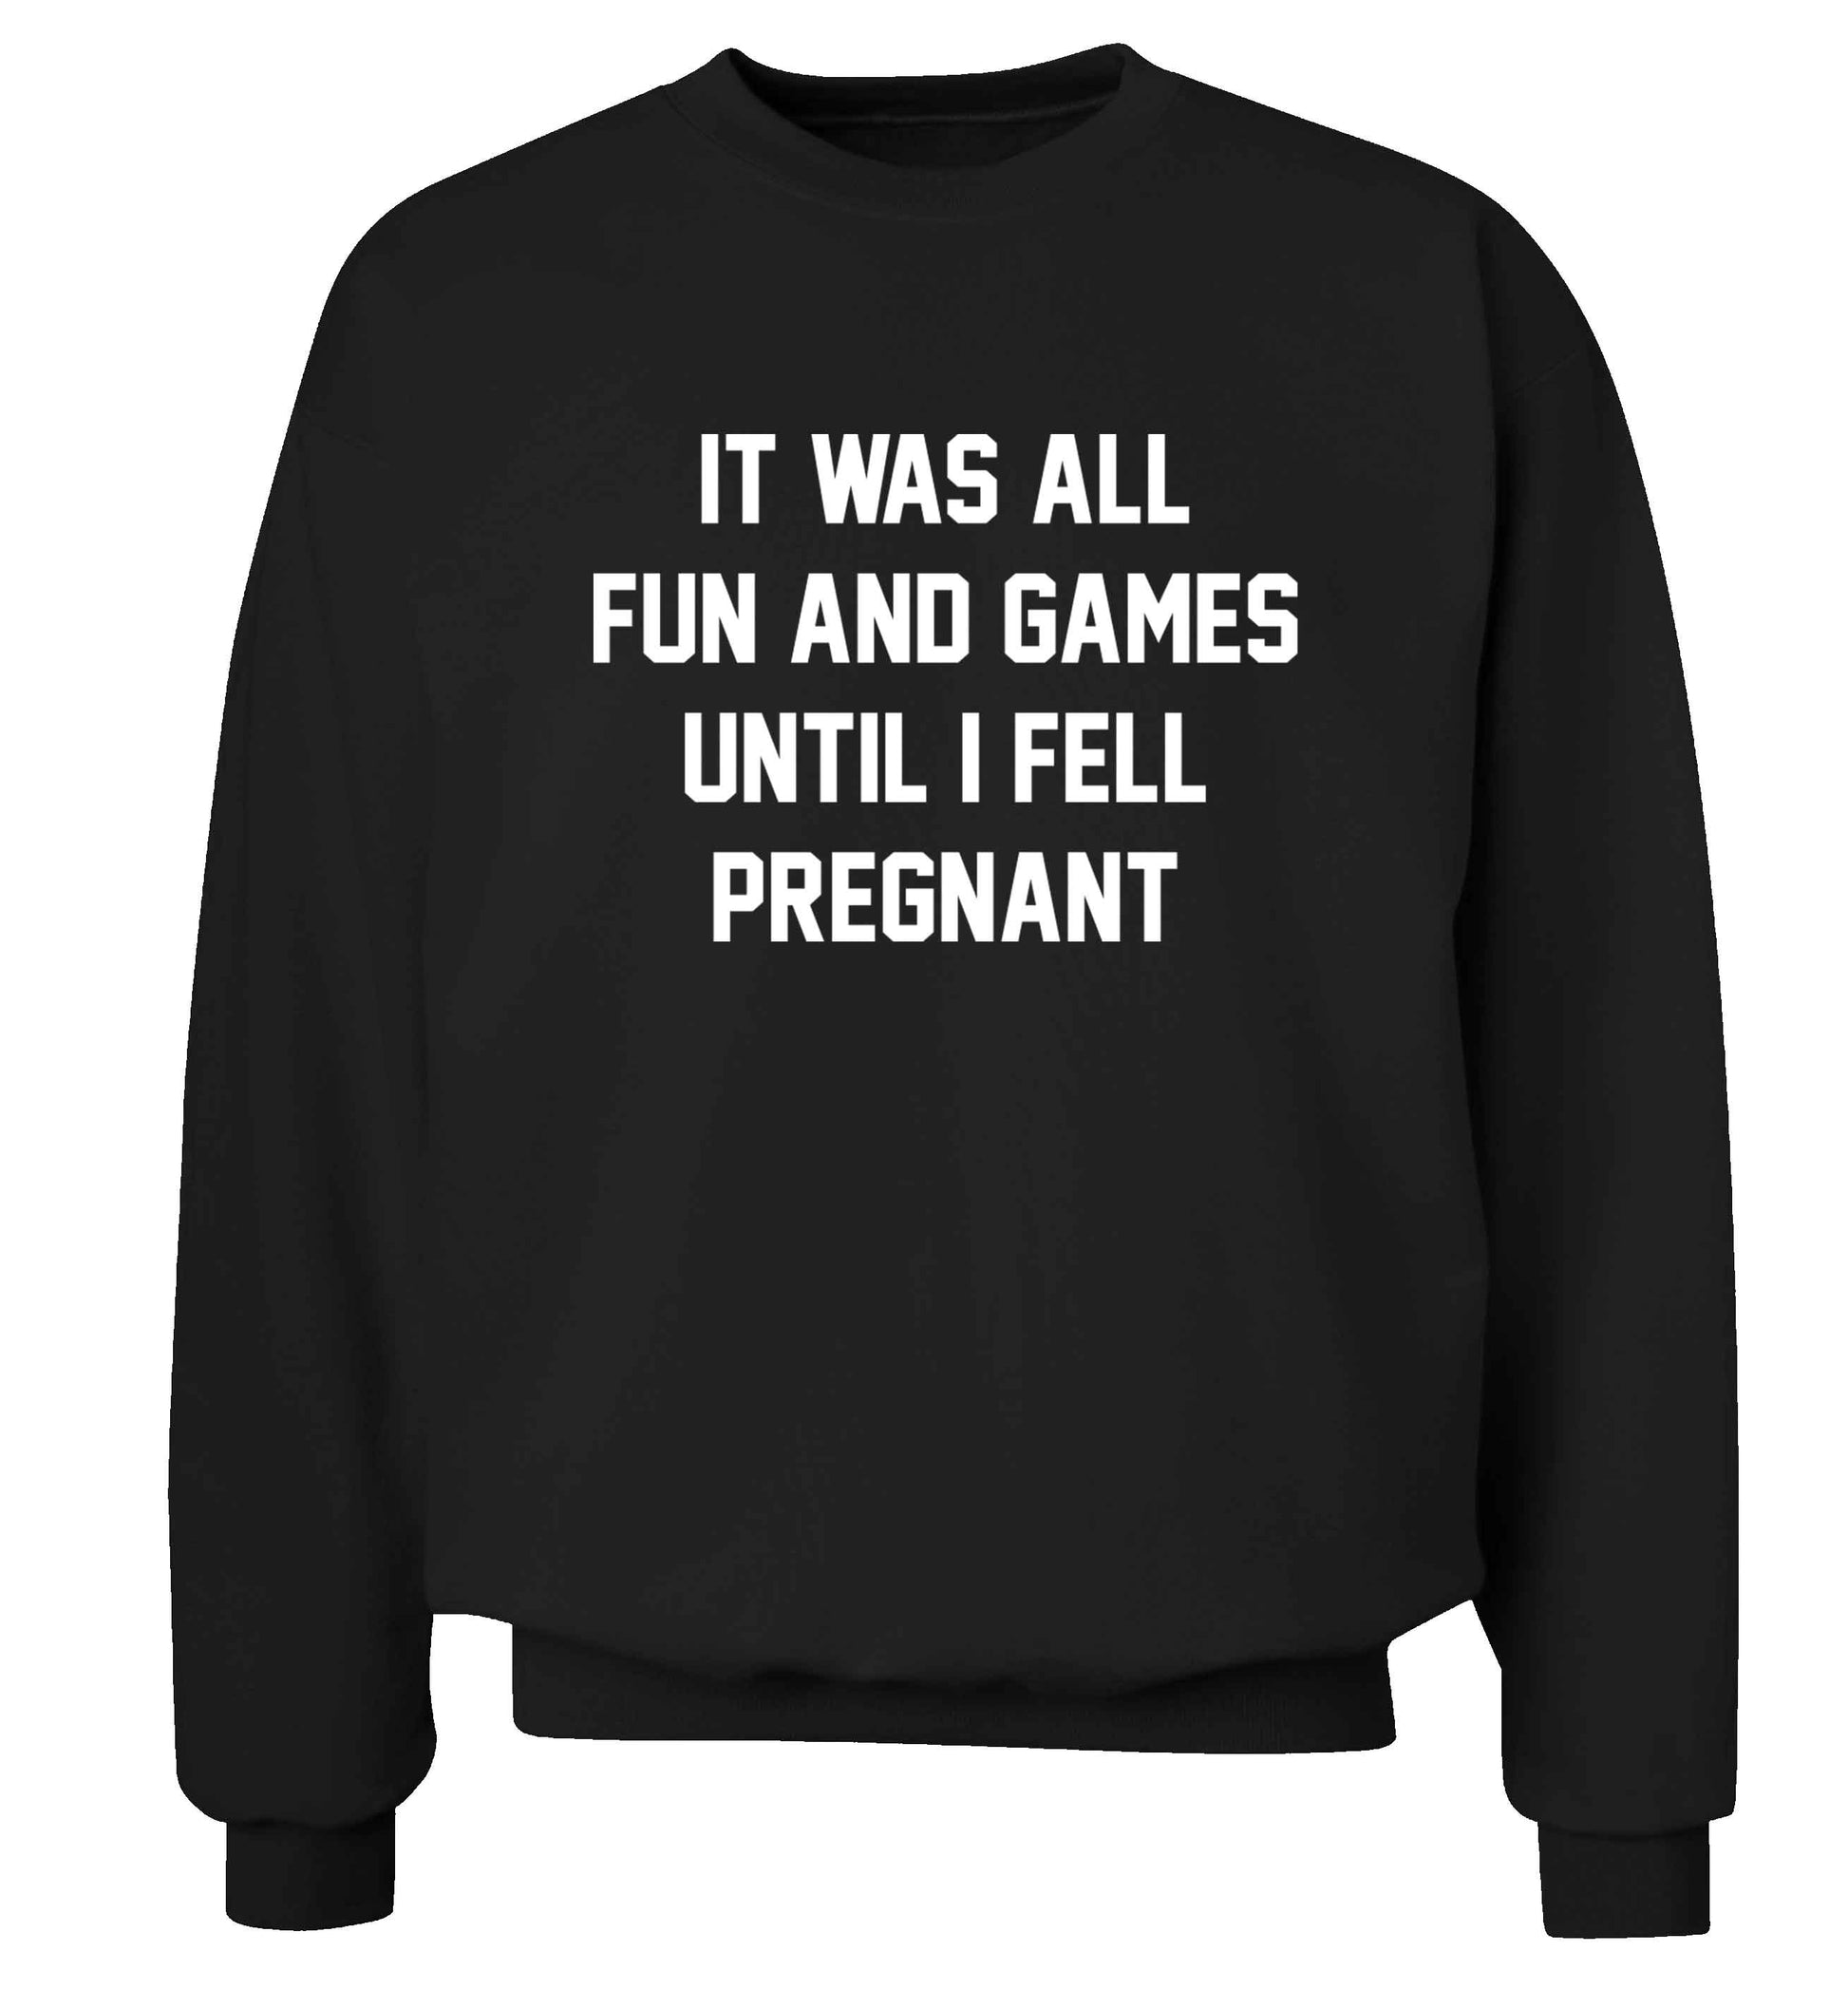 It was all fun and games until I fell pregnant kicks Adult's unisex black Sweater 2XL